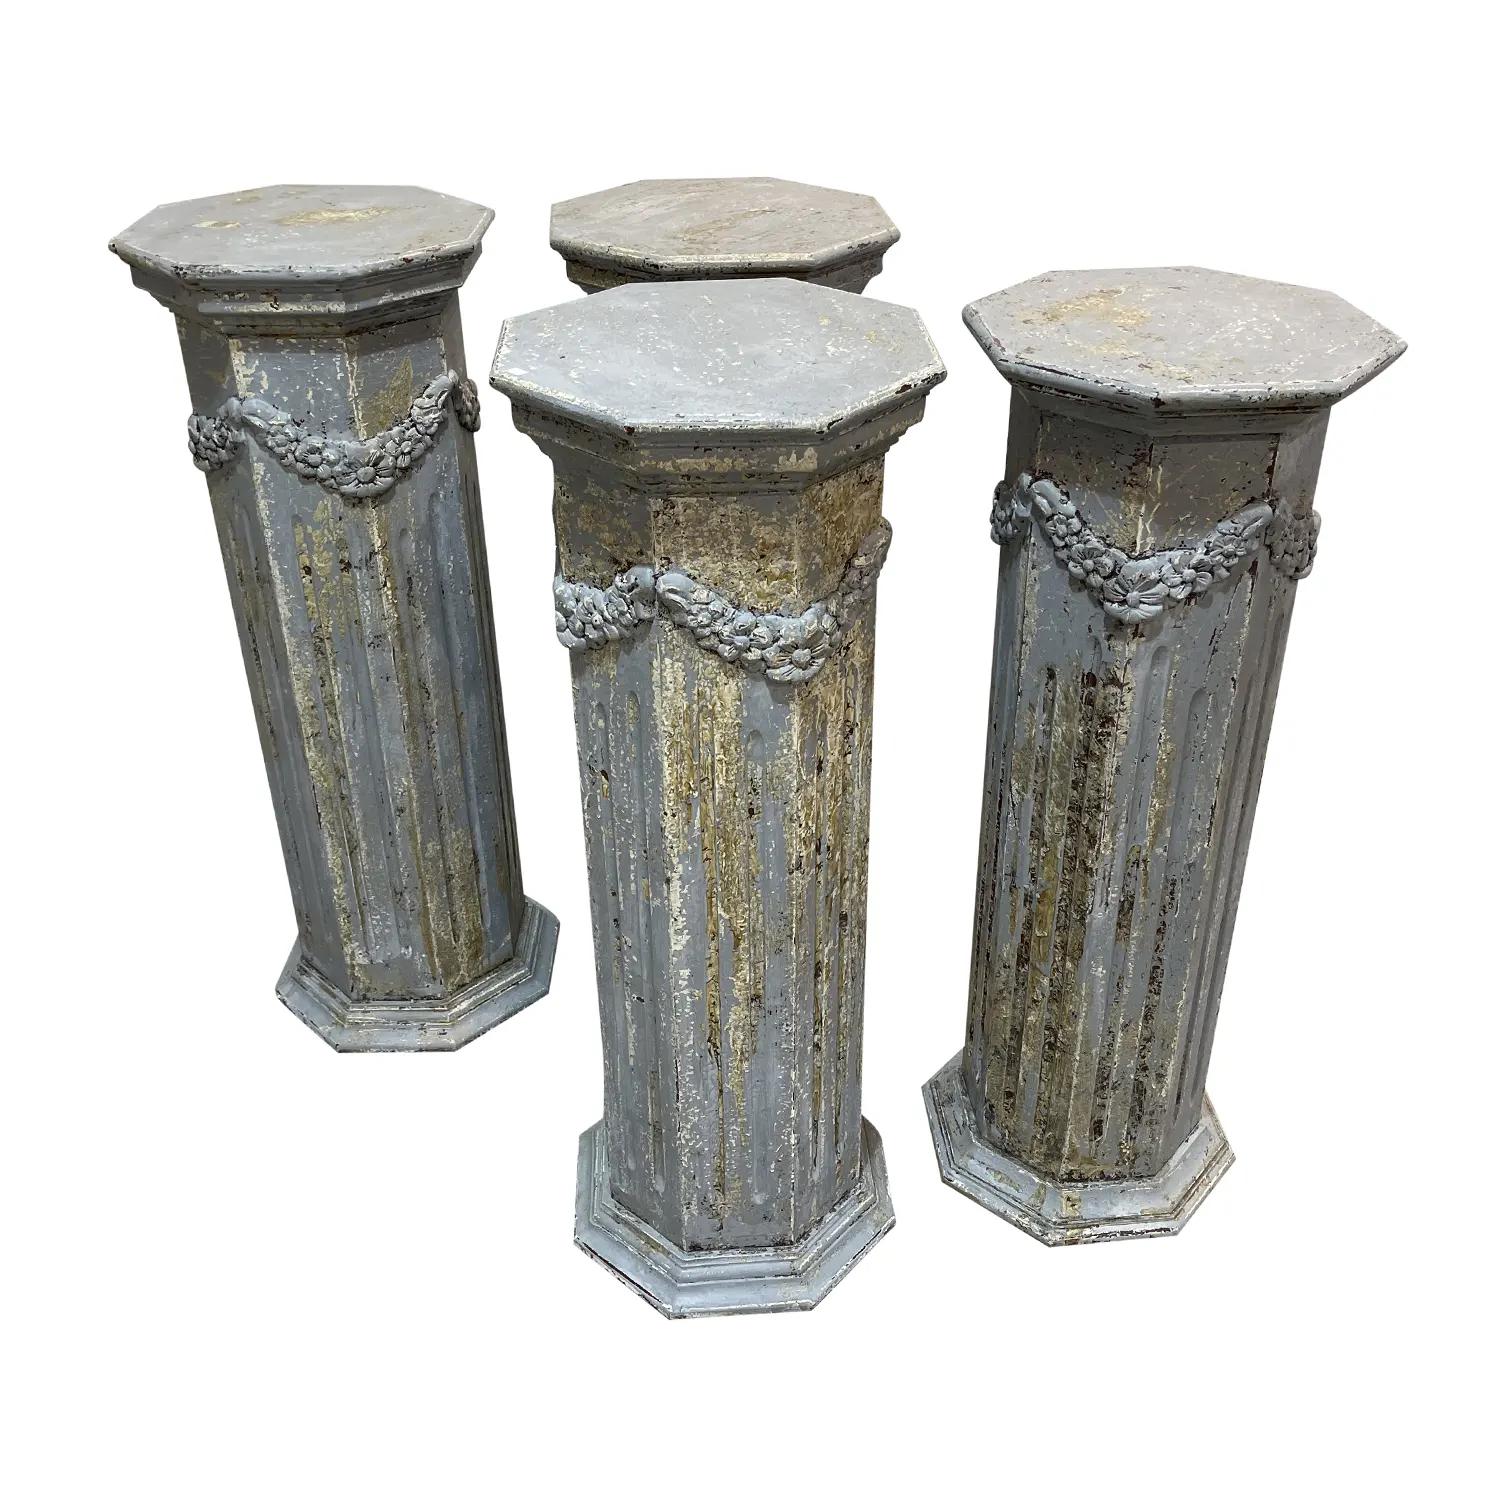 An antique set of four 19th century pedestals of octagonal shape on the top and bottom, in good condition. The French pedestals are made of hand crafted painted Pinewood, abundantly decorated with garland swags and mounted on a fluted body. These